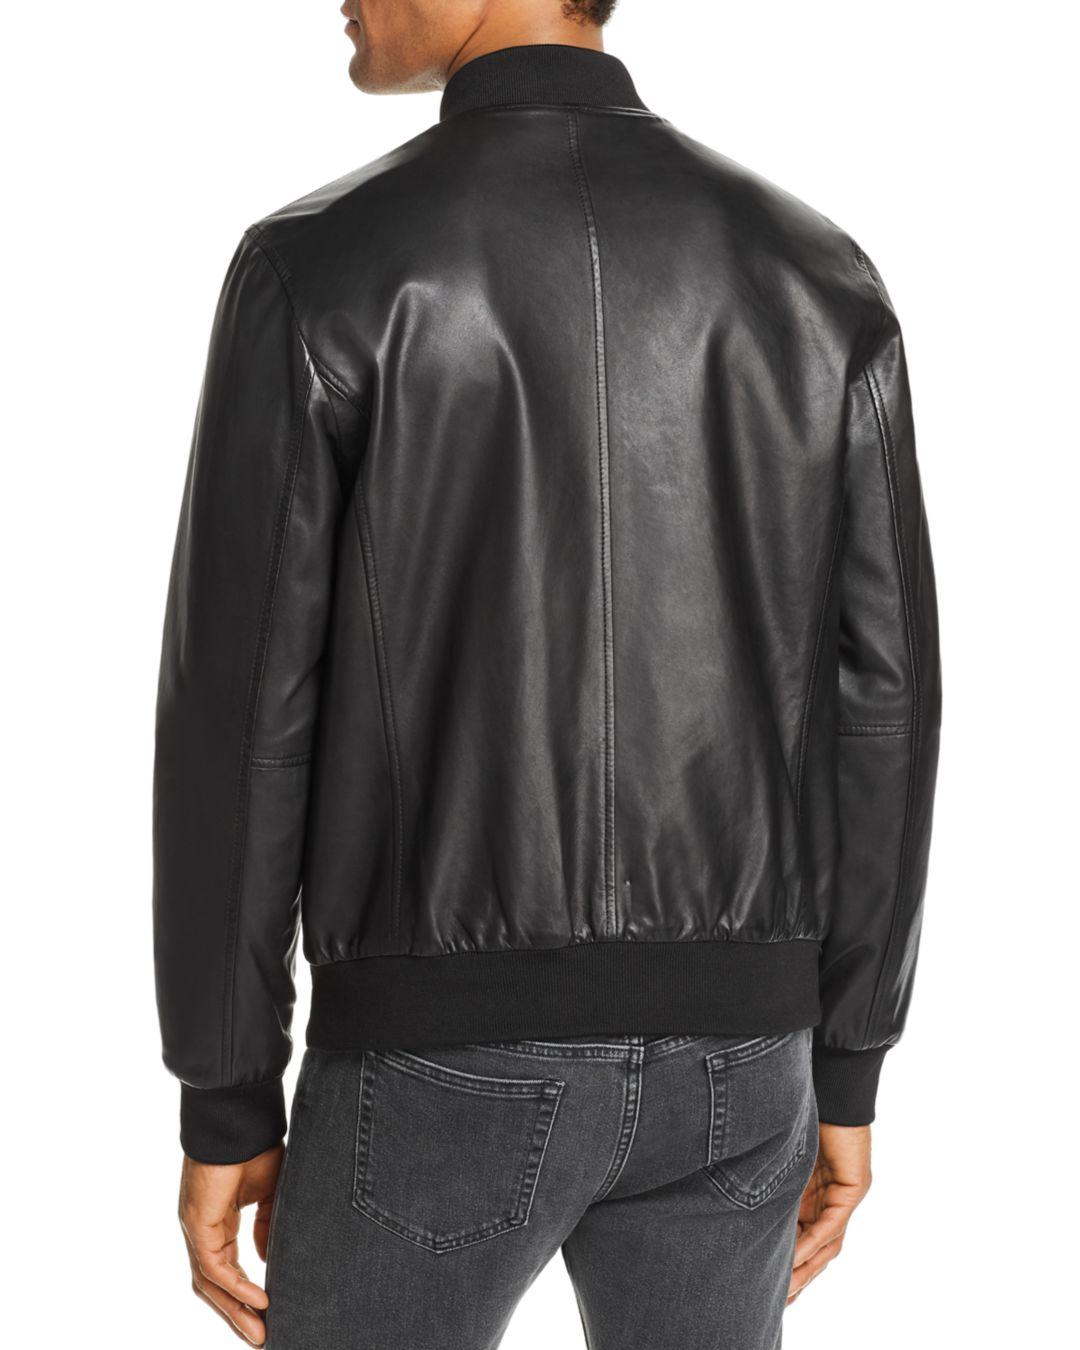 Cole Haan Reversible Leather Bomber Jacket in Black for Men - Lyst